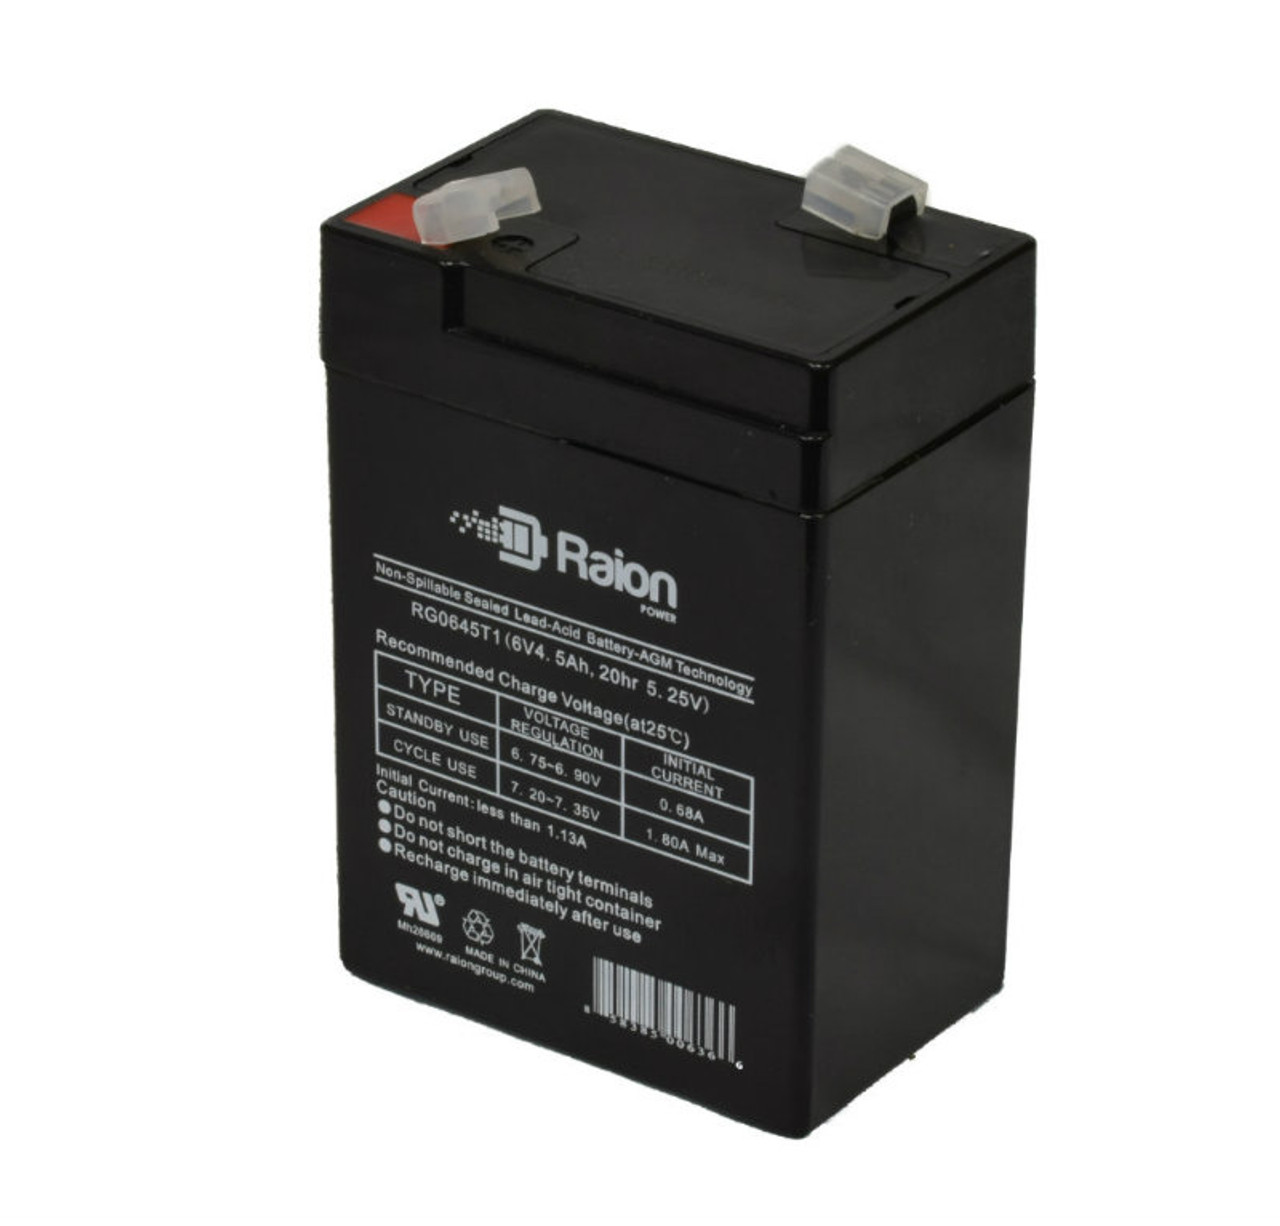 Raion Power RG0645T1 6V 4.5Ah Replacement Battery Cartridge for Seawill SW640